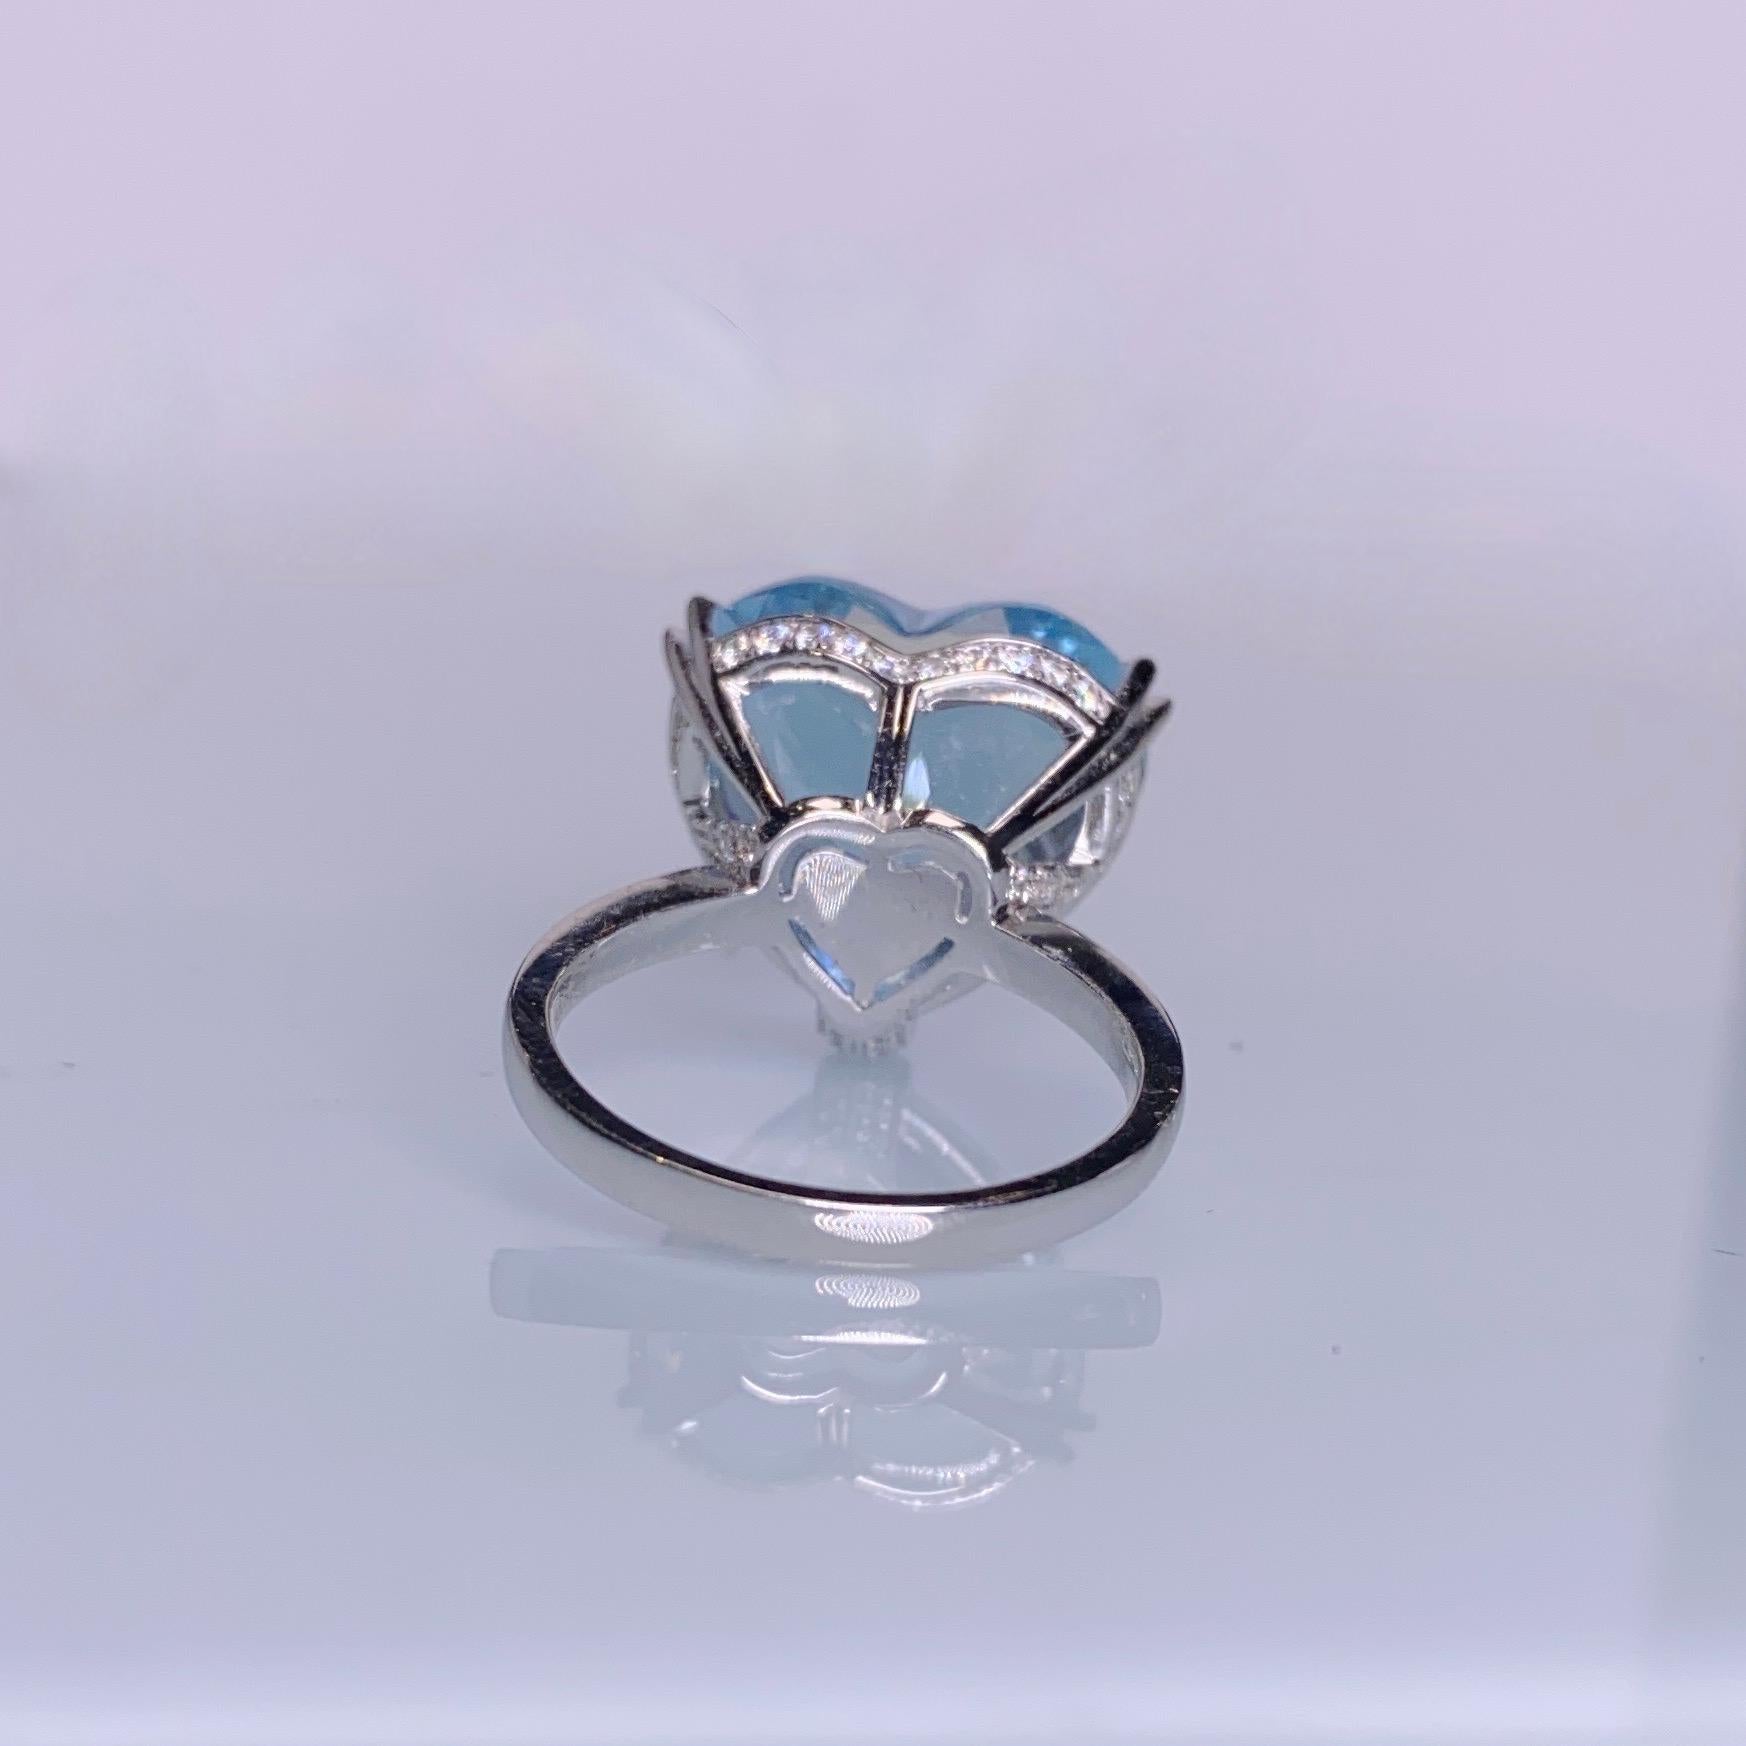 Contemporary 16.39 Ct Intense Blue Aquamarine and Diamond Ring in 18k White Gold